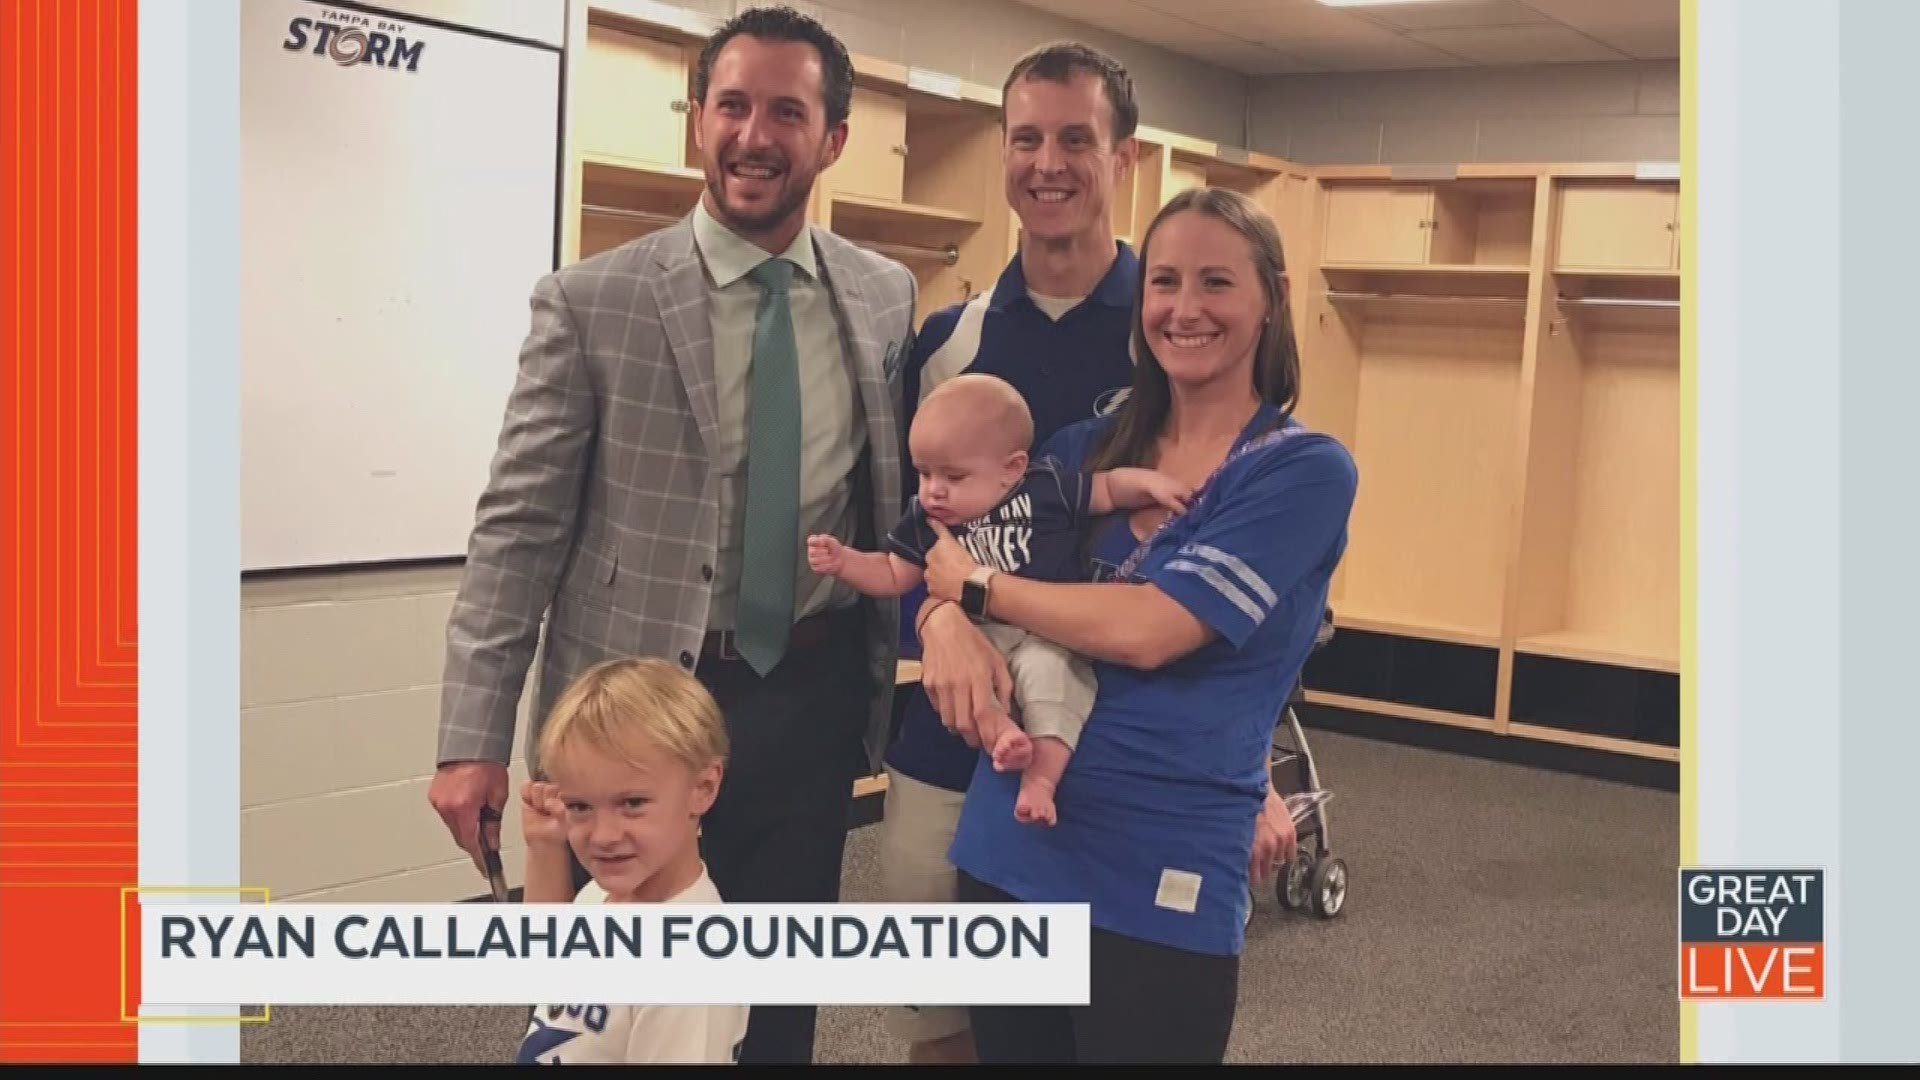 The Ryan Callahan Foundation is a non-profit organization established by Ryan and his family to make memorable experiences a reality for kids who are battling, or who have survived, cancer.